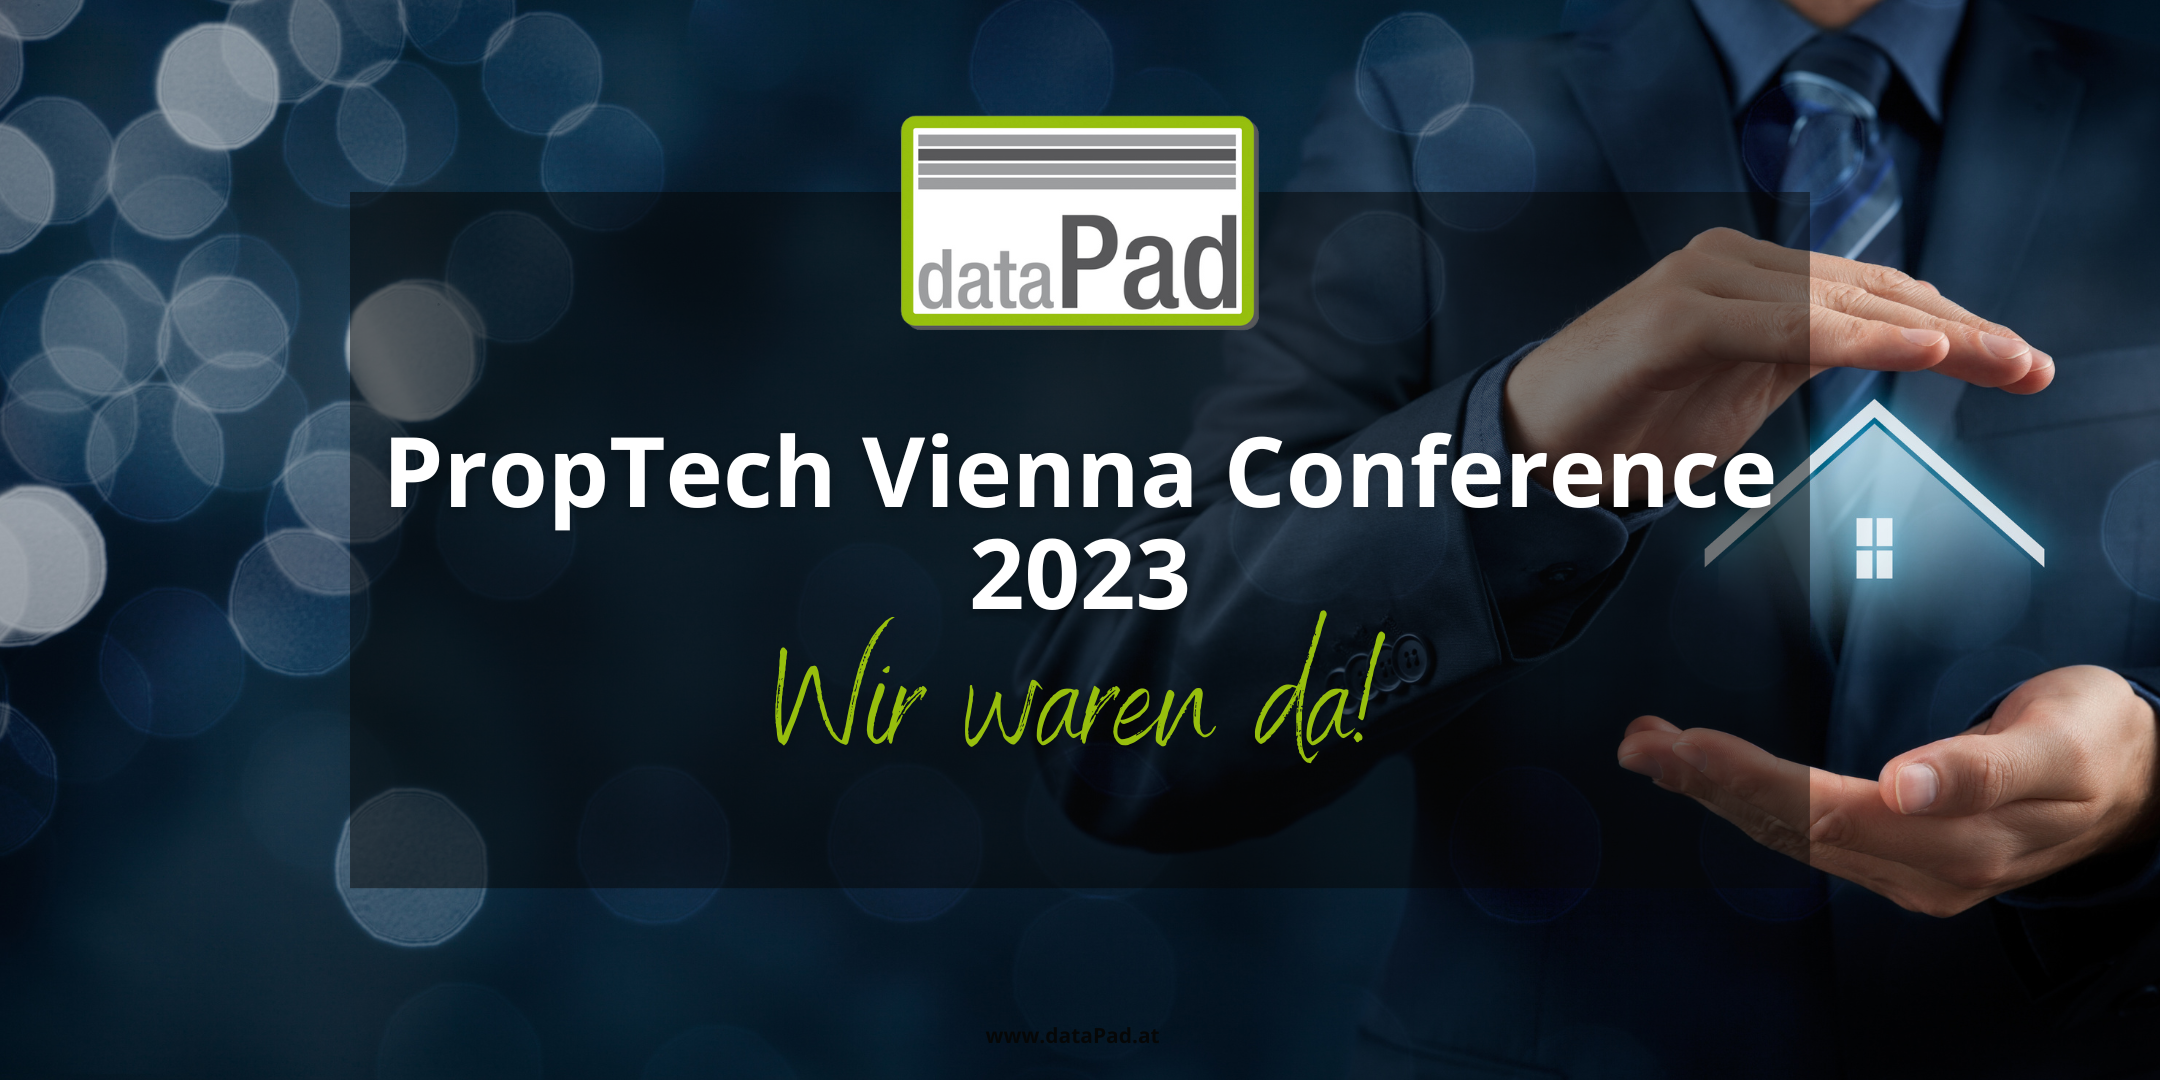 dataPad_PropTech_Vienna_Conference_2023